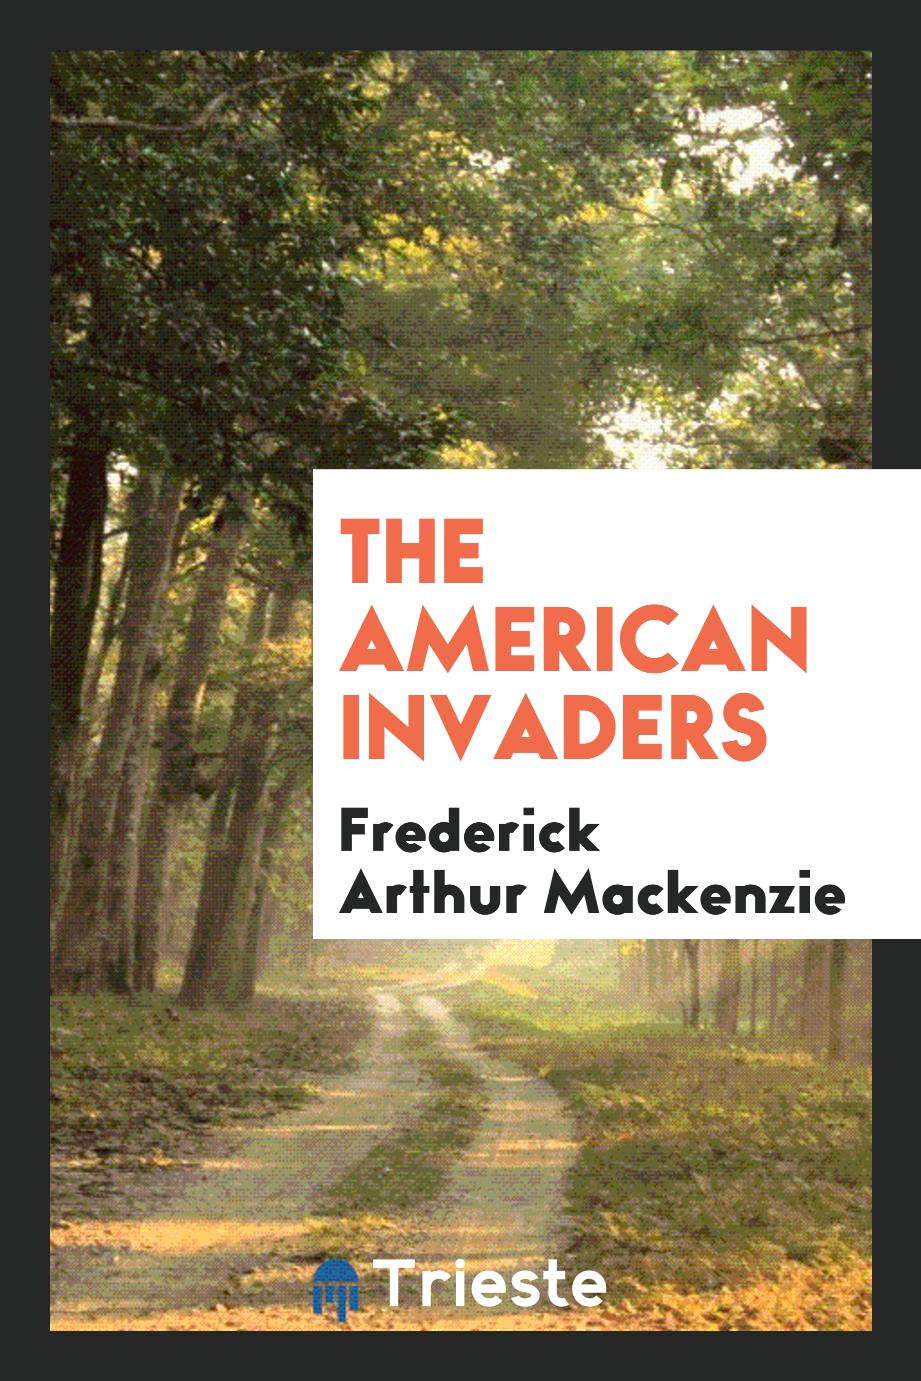 The American invaders